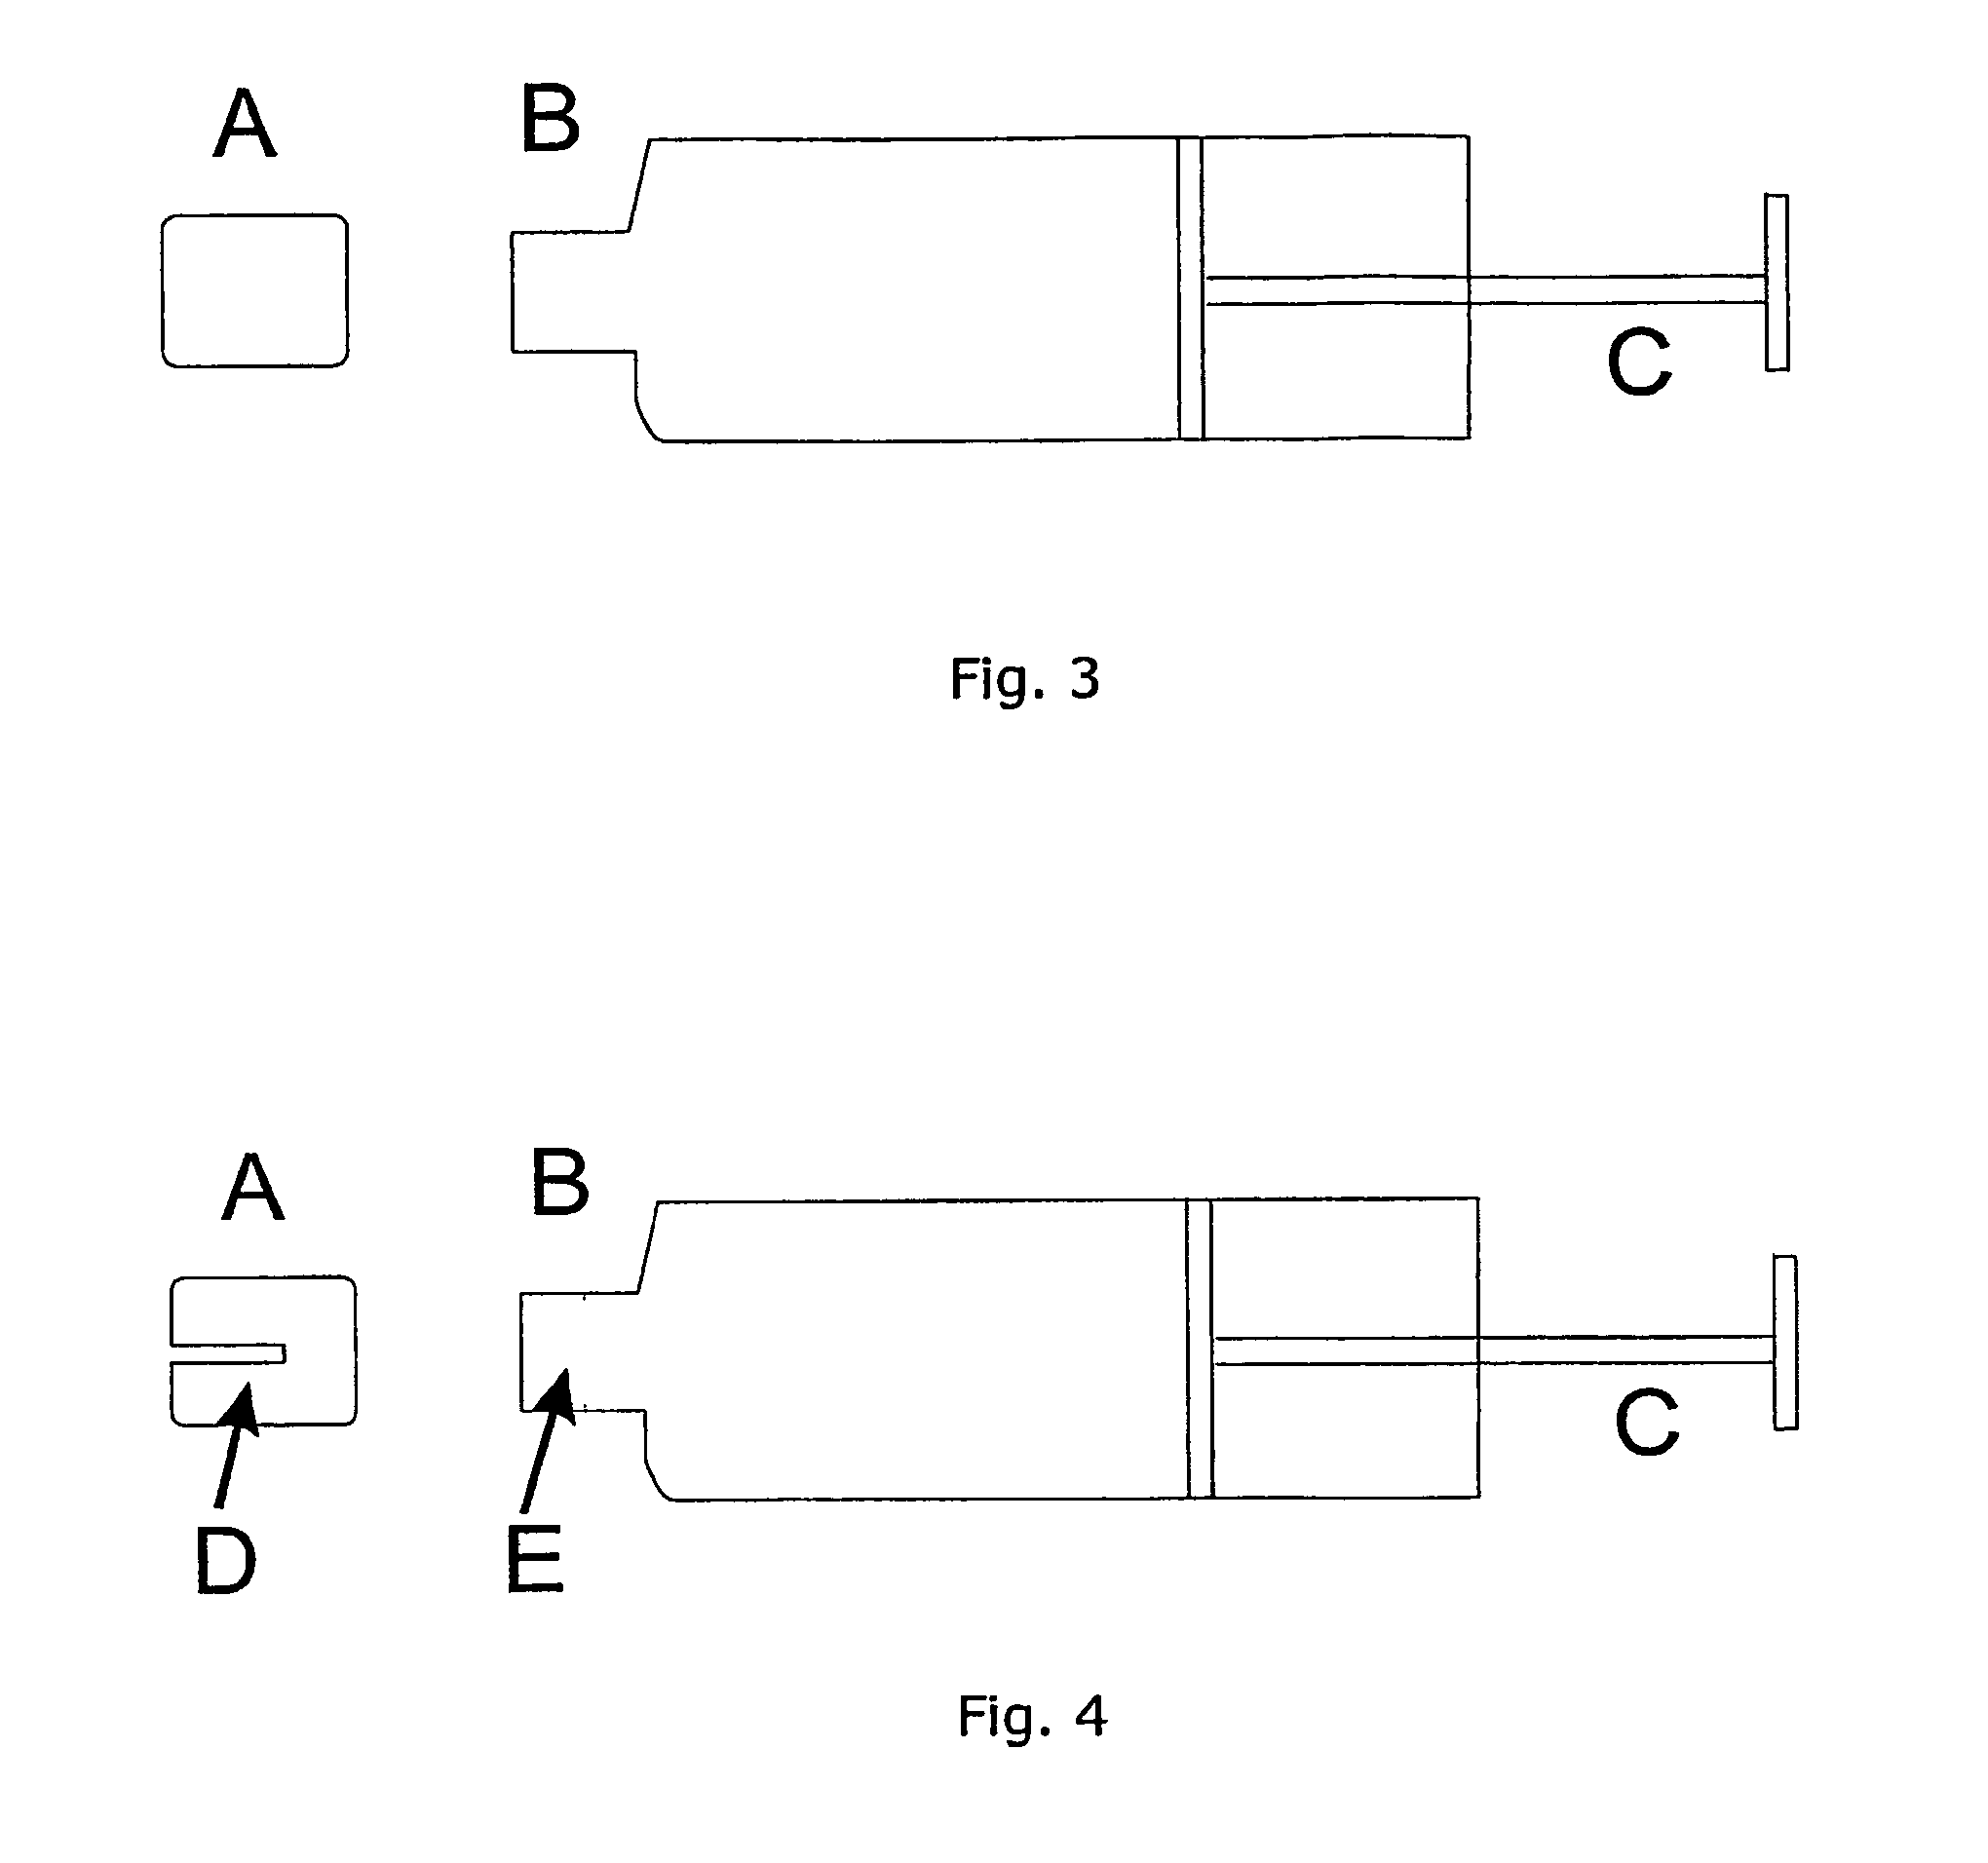 Method for converting venous blood values to arterial blood values, system for utilising said method and devices for such system